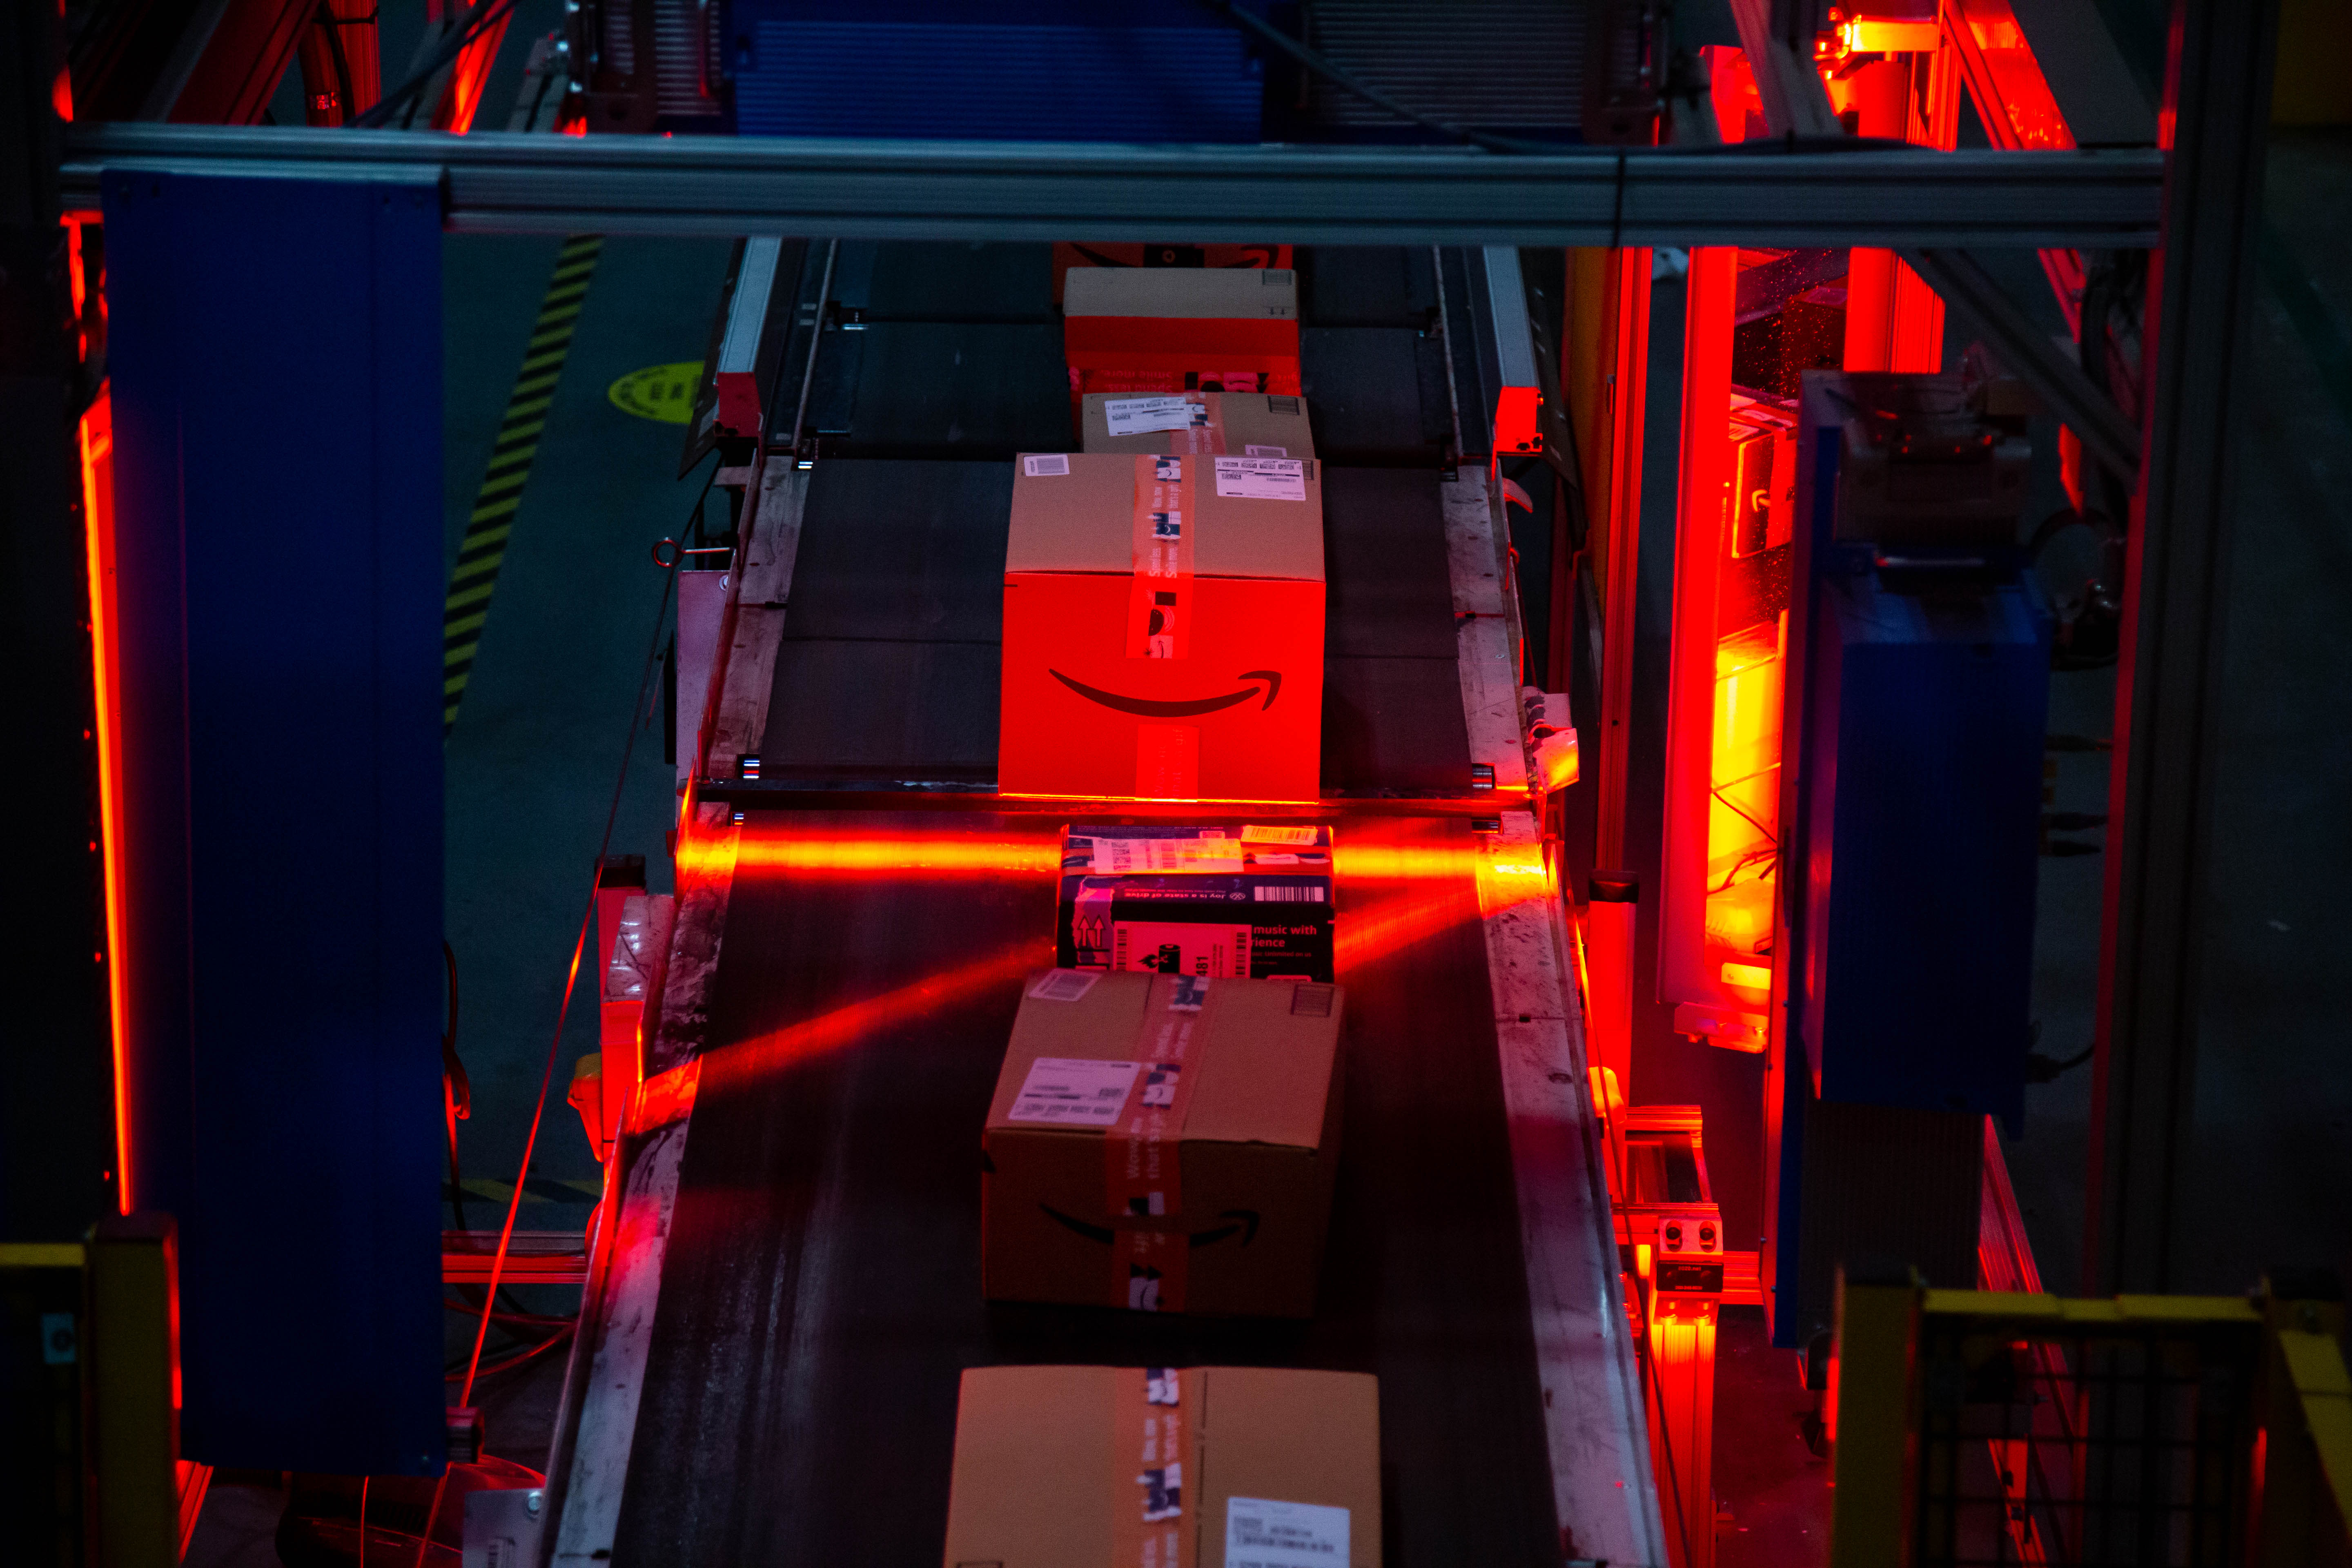 An Amazon-branded box moves through a red light scanner on a conveyer belt.